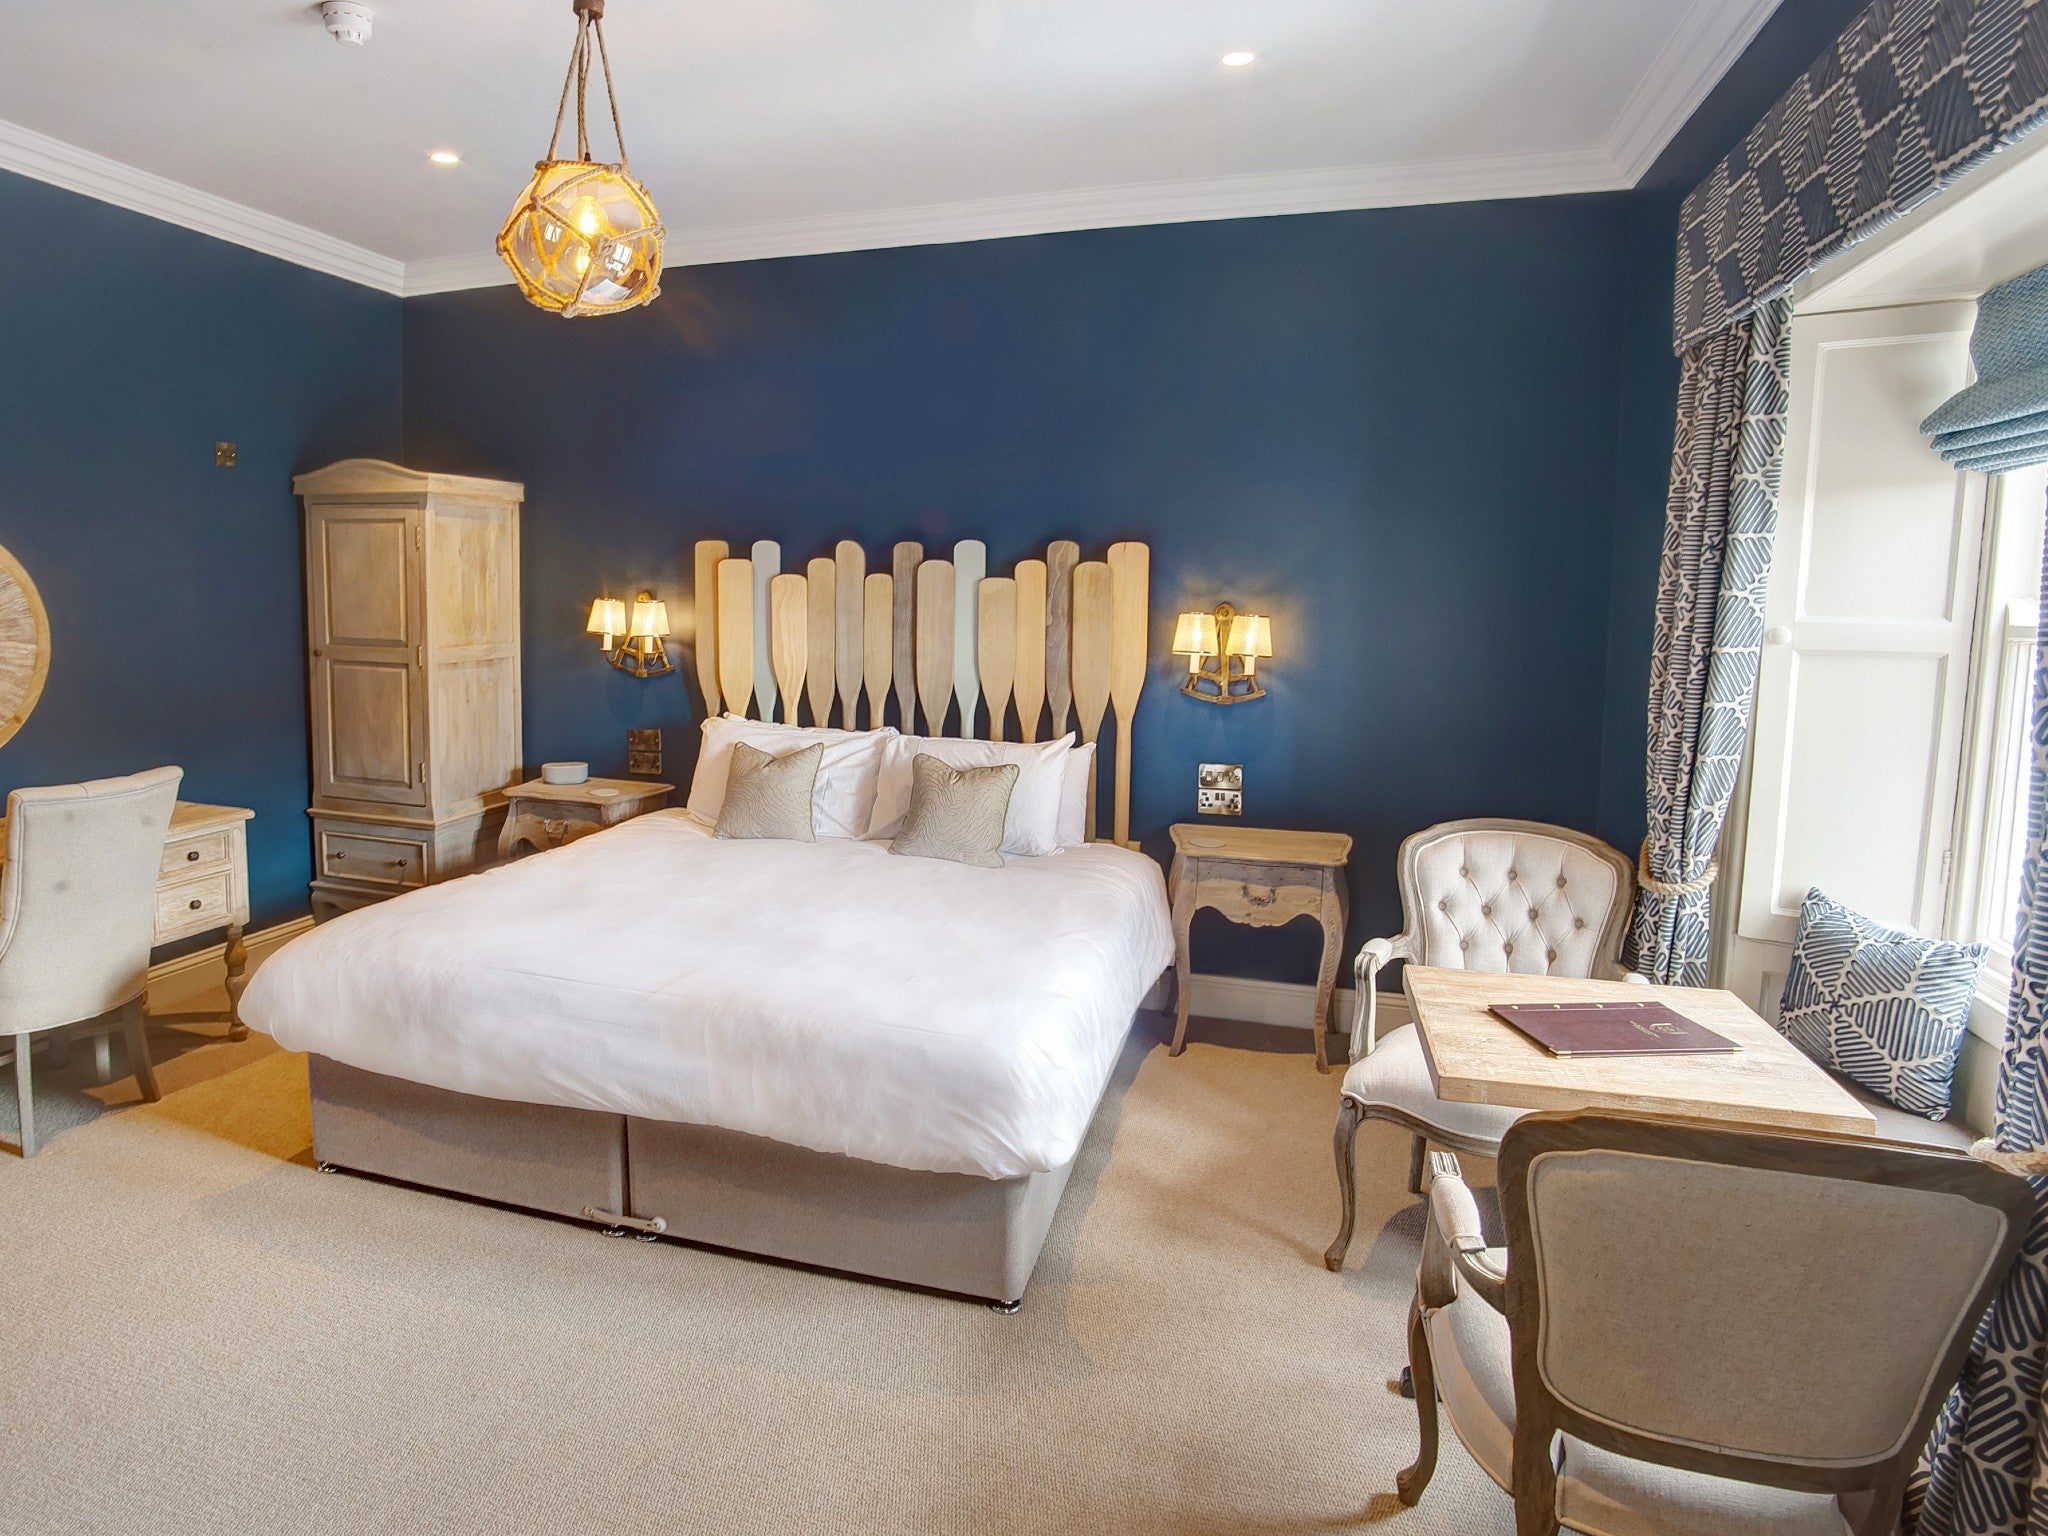 The Lord Crewe Bamburgh is a recently refurbished boutique hotel